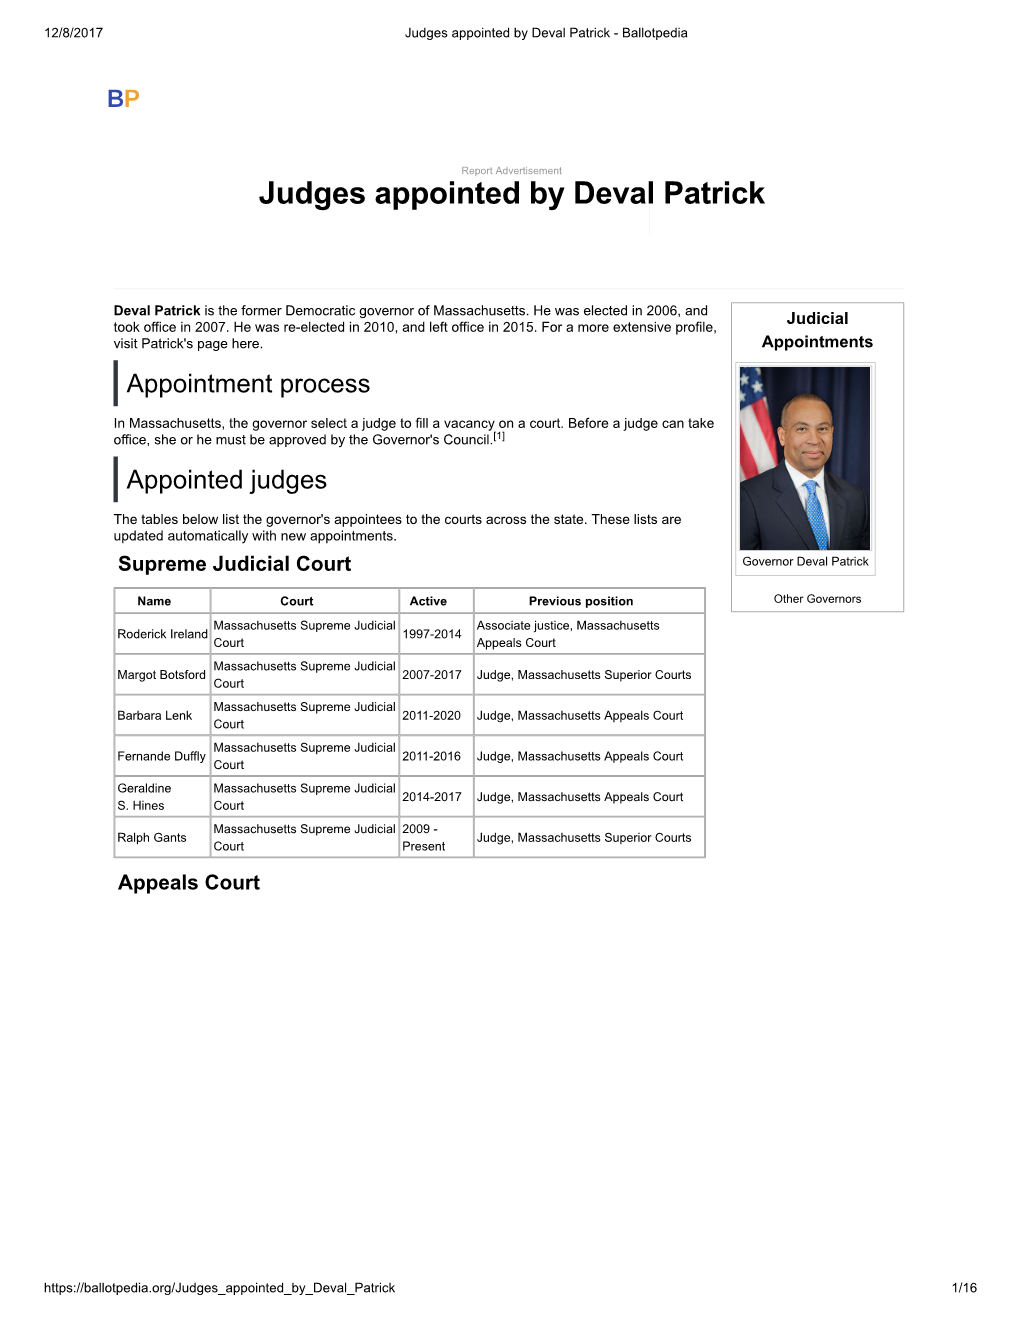 Judges Appointed by Deval Patrick - Ballotpedia